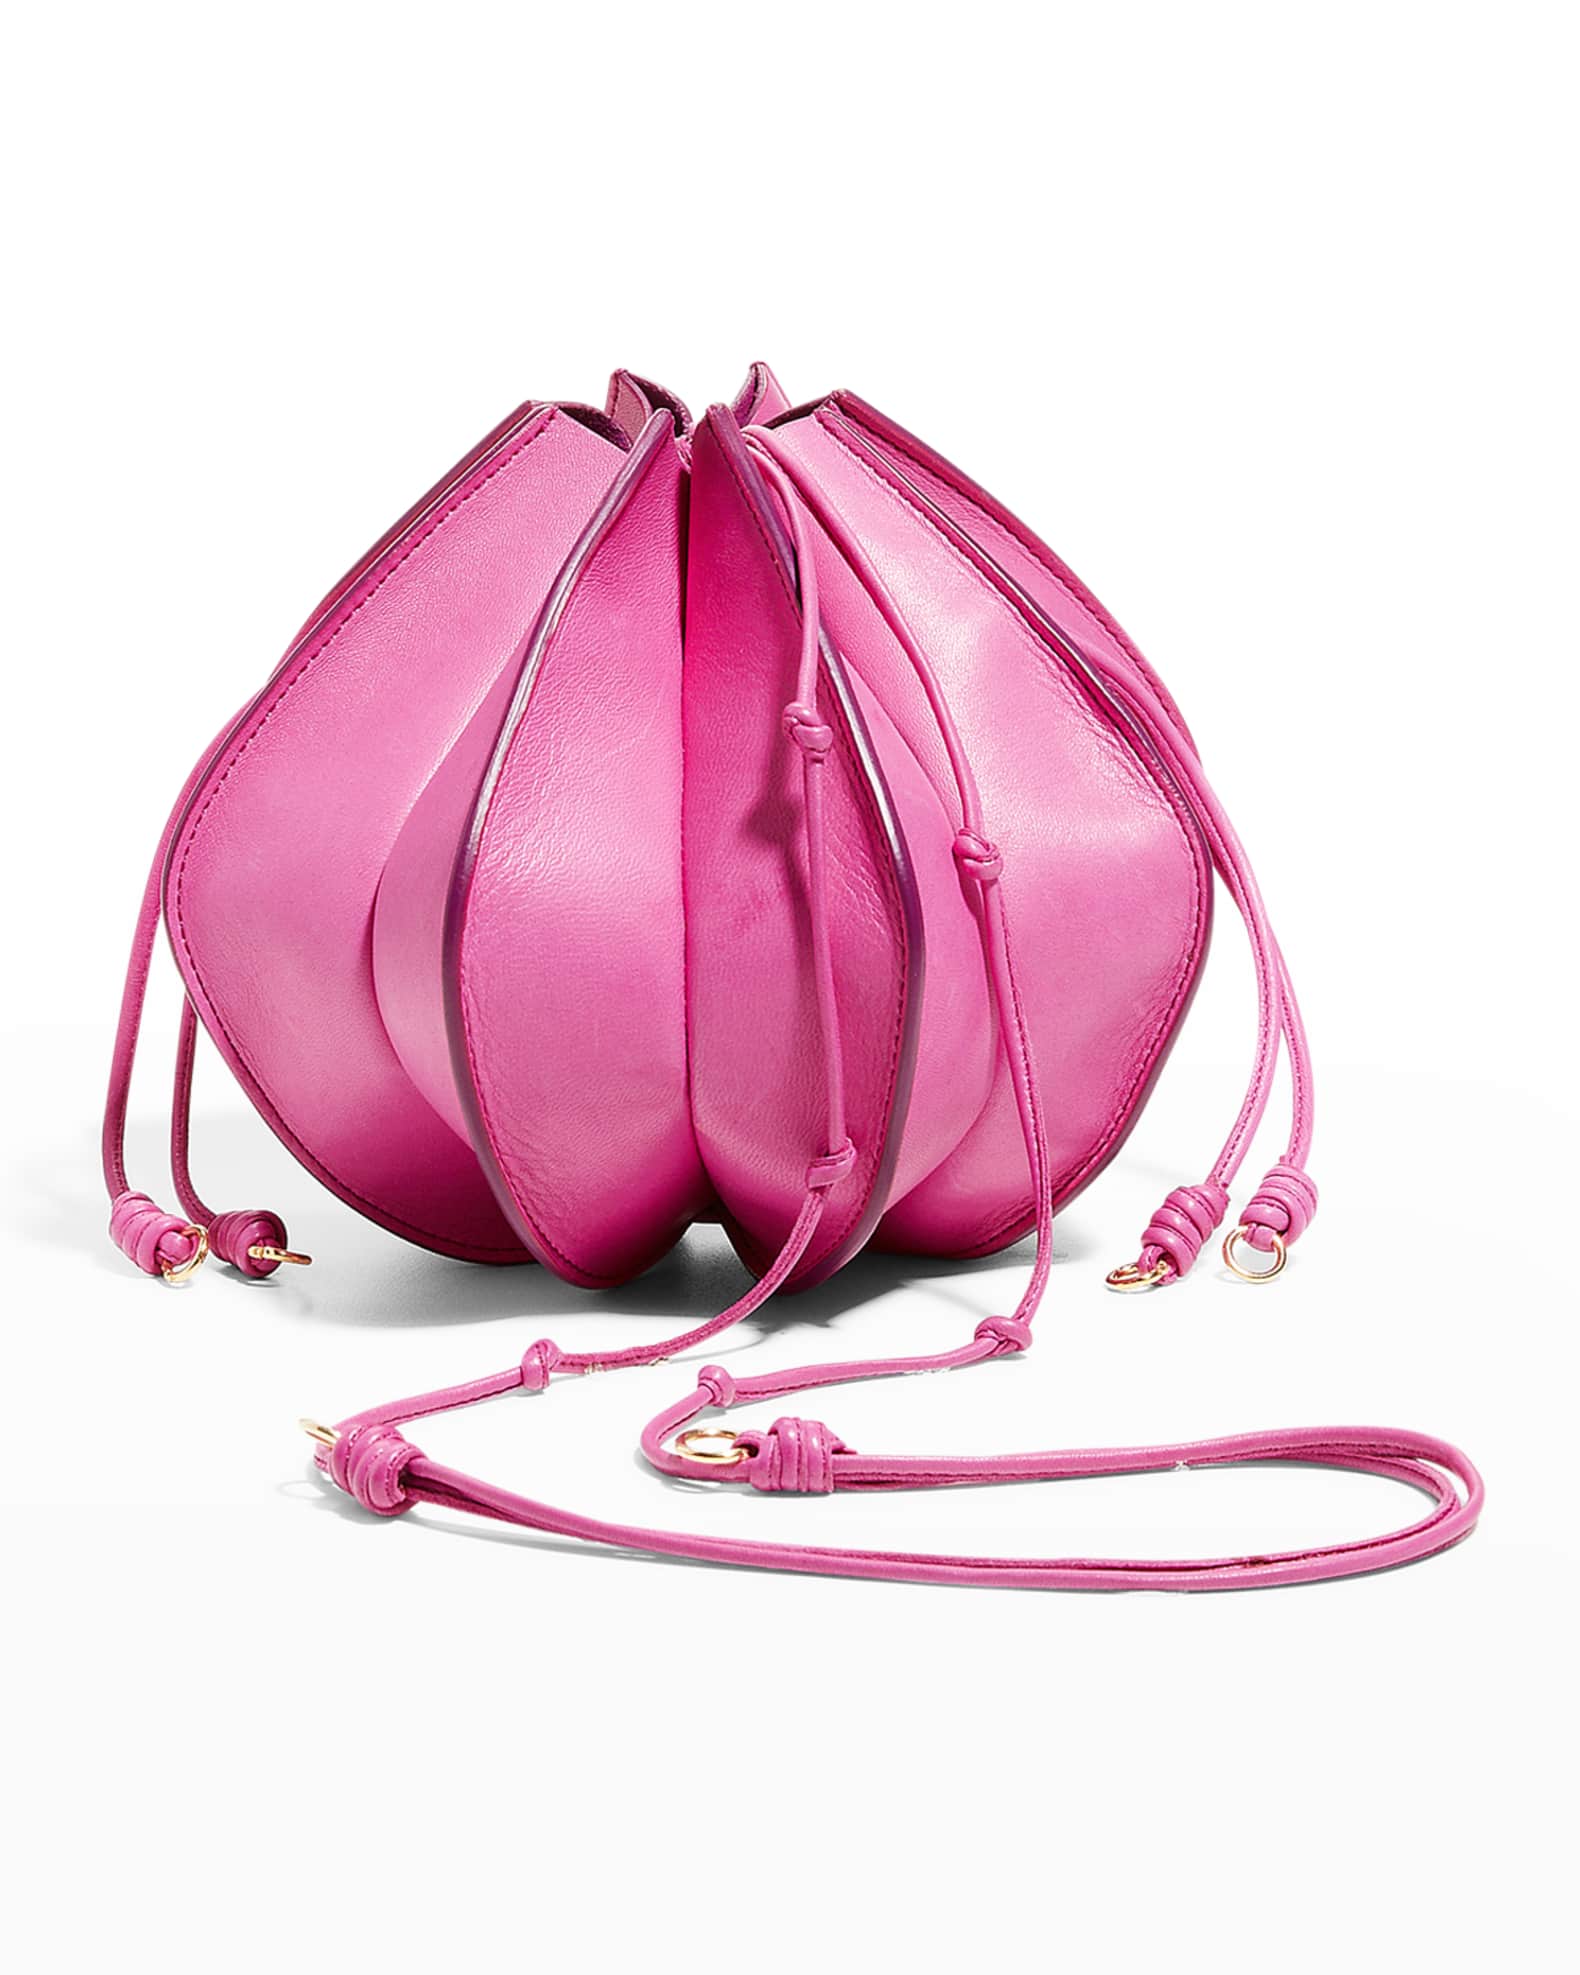 The bag’s drawstring closure expands to allow everything to fit.